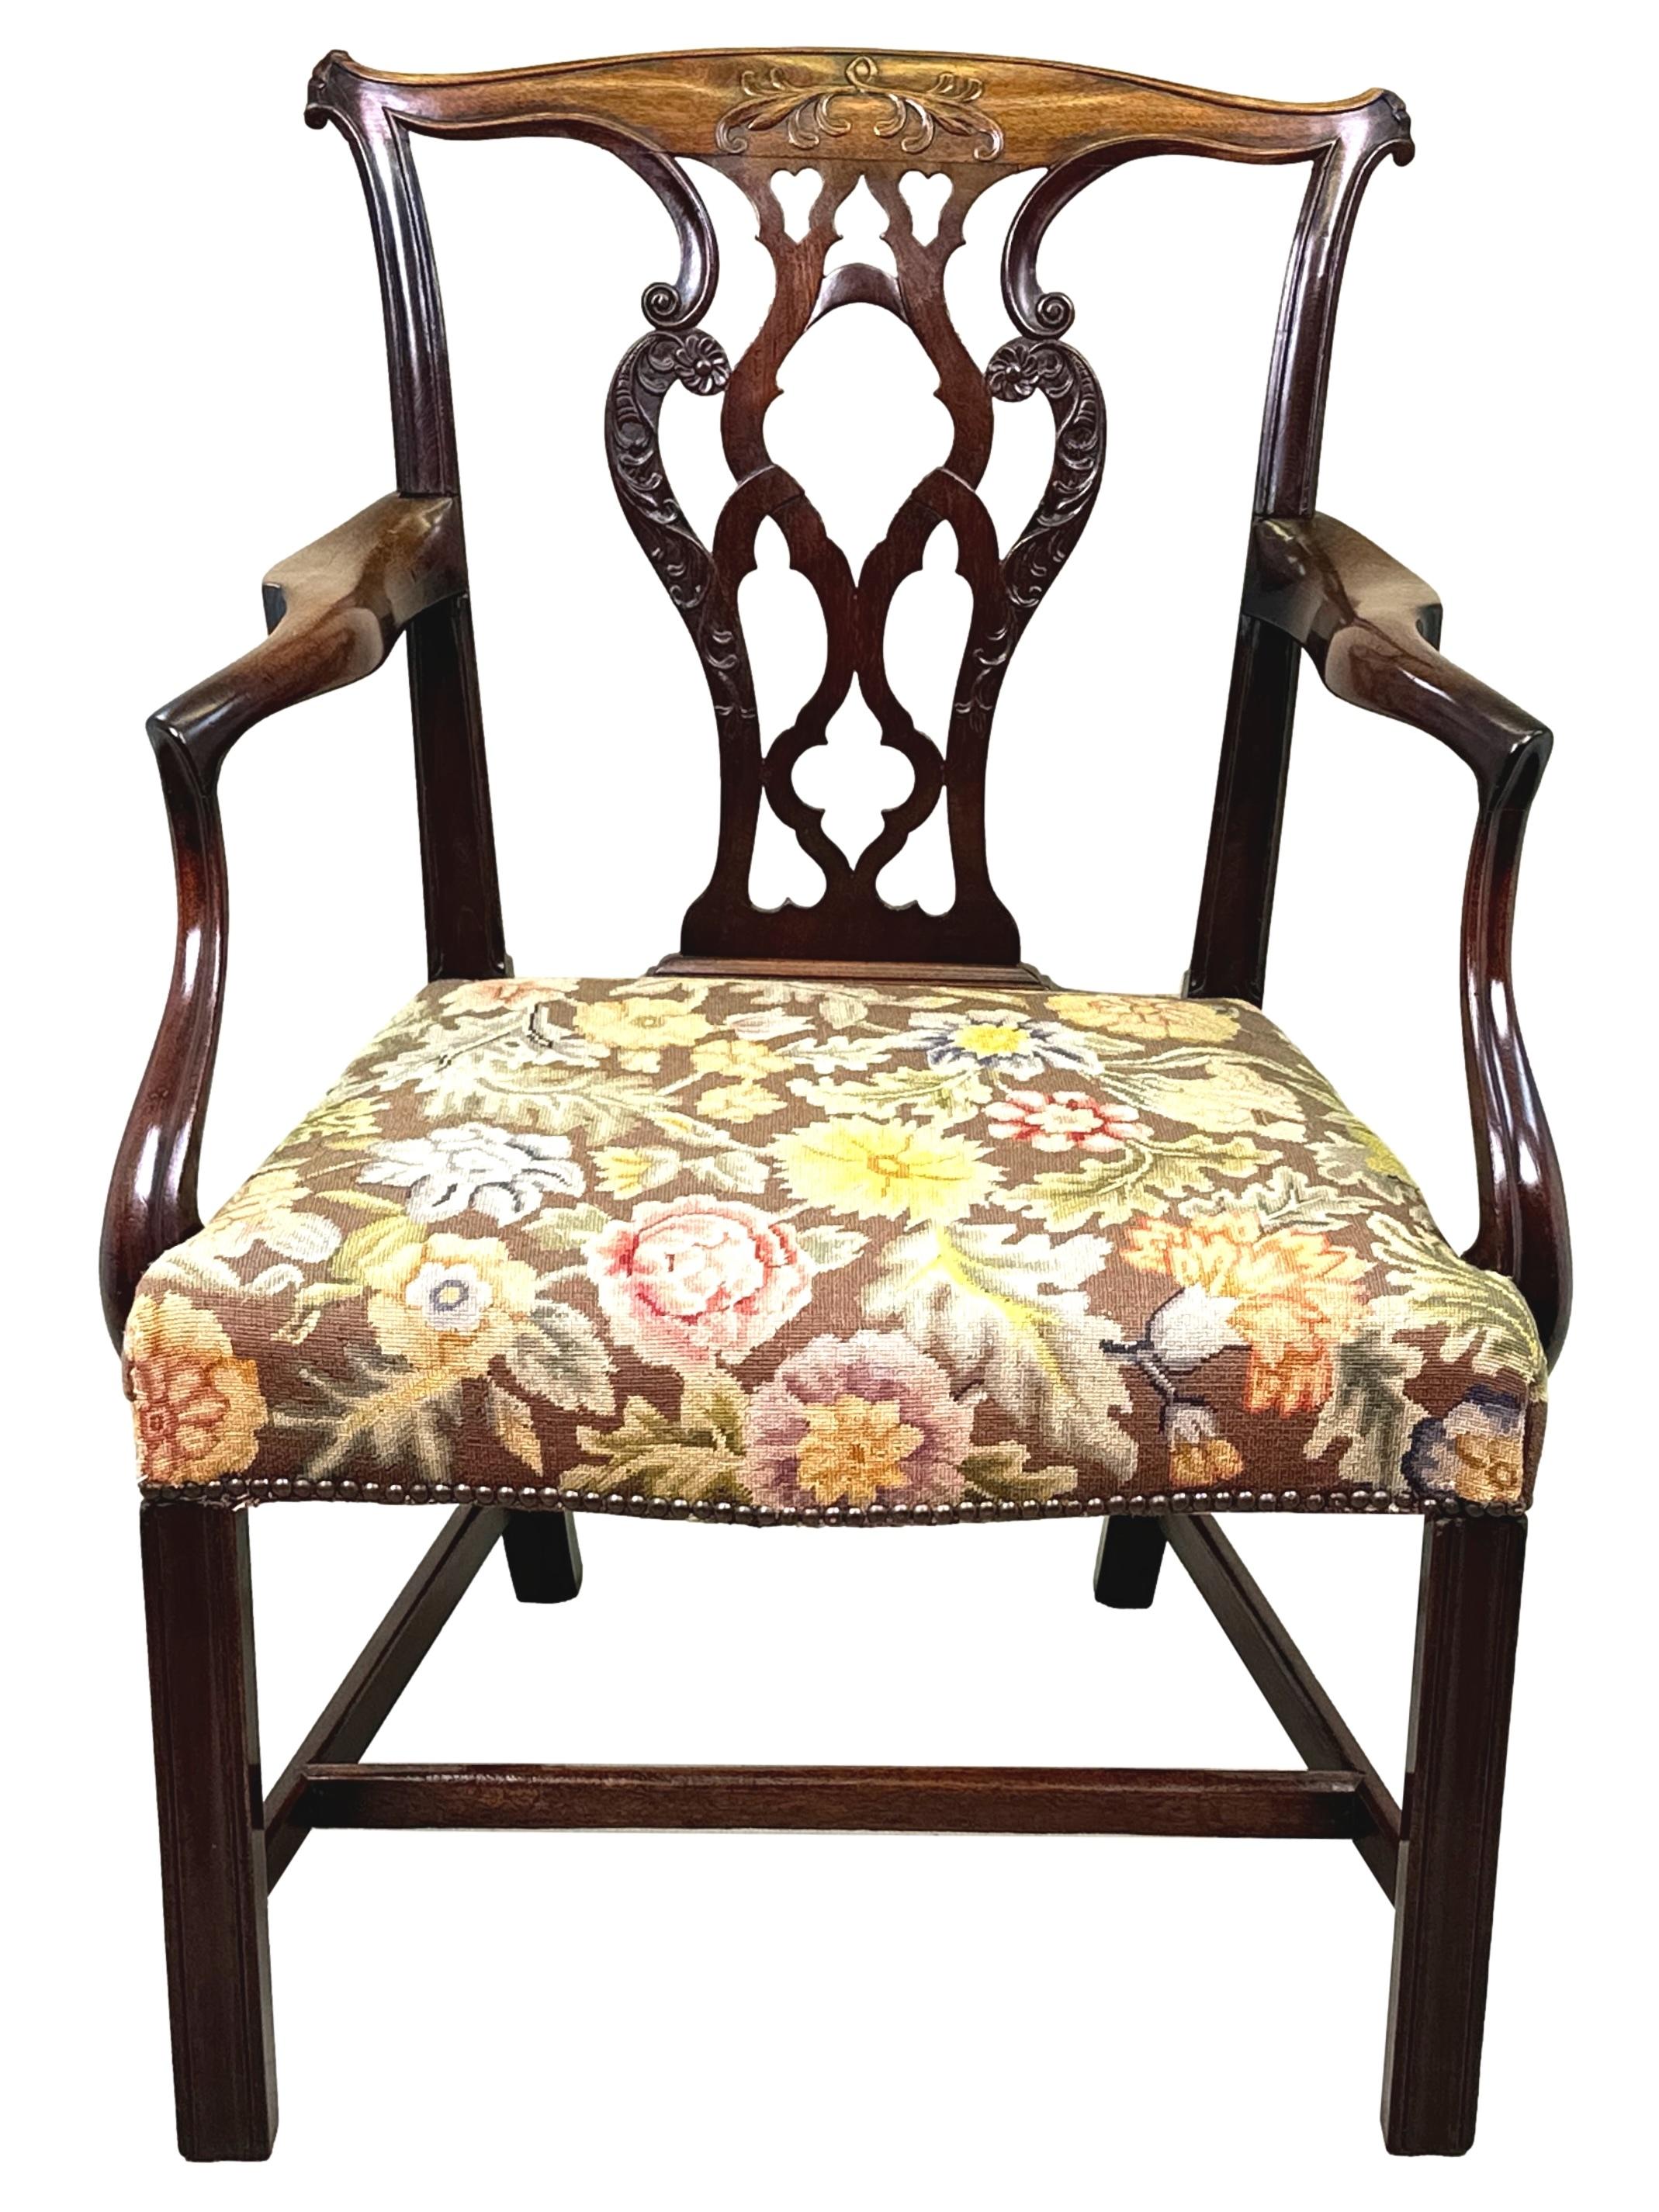 Chippendale 18th Century Mahogany Carver Armchair For Sale 6